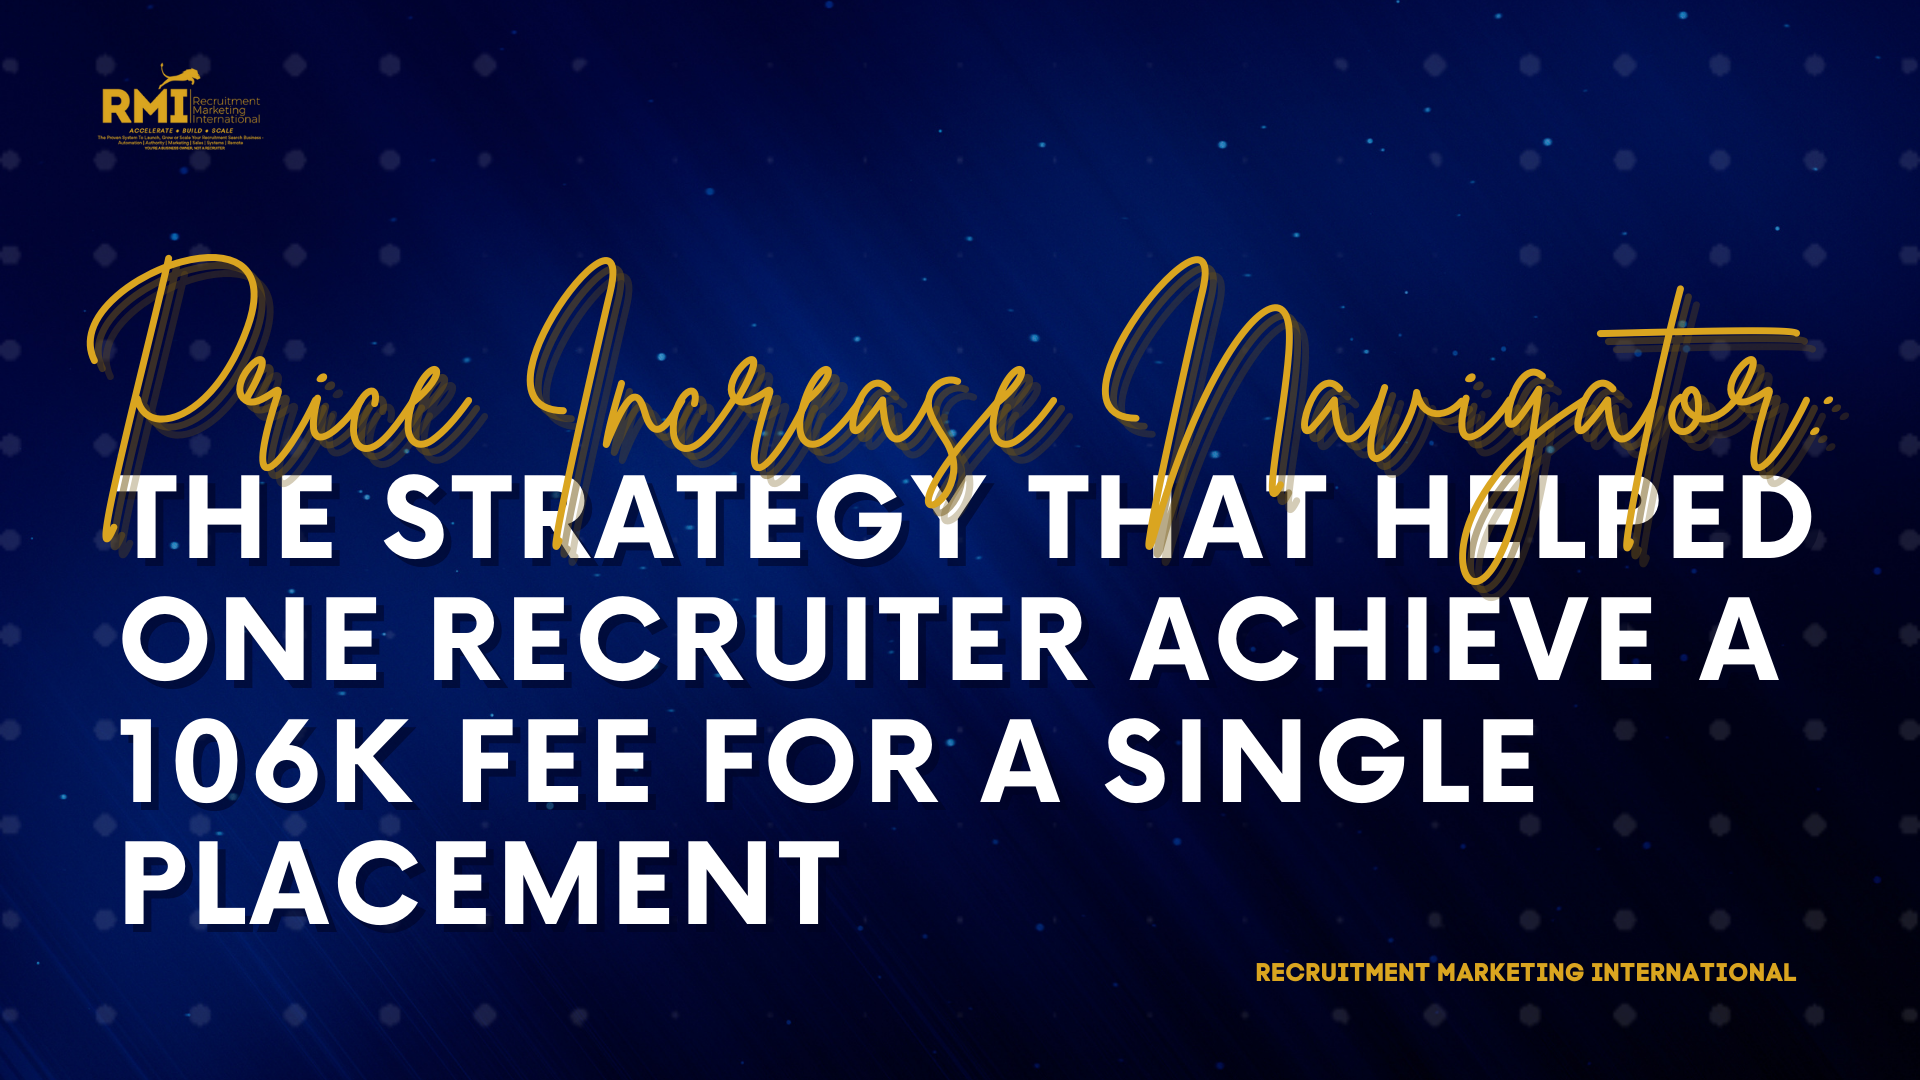 PODCAST 232 – PRICE INCREASE NAVIGATOR: THE STRATEGY THAT HELPED ONE RECRUITER ACHIEVE A 106K FEE FOR A SINGLE PLACEMENT